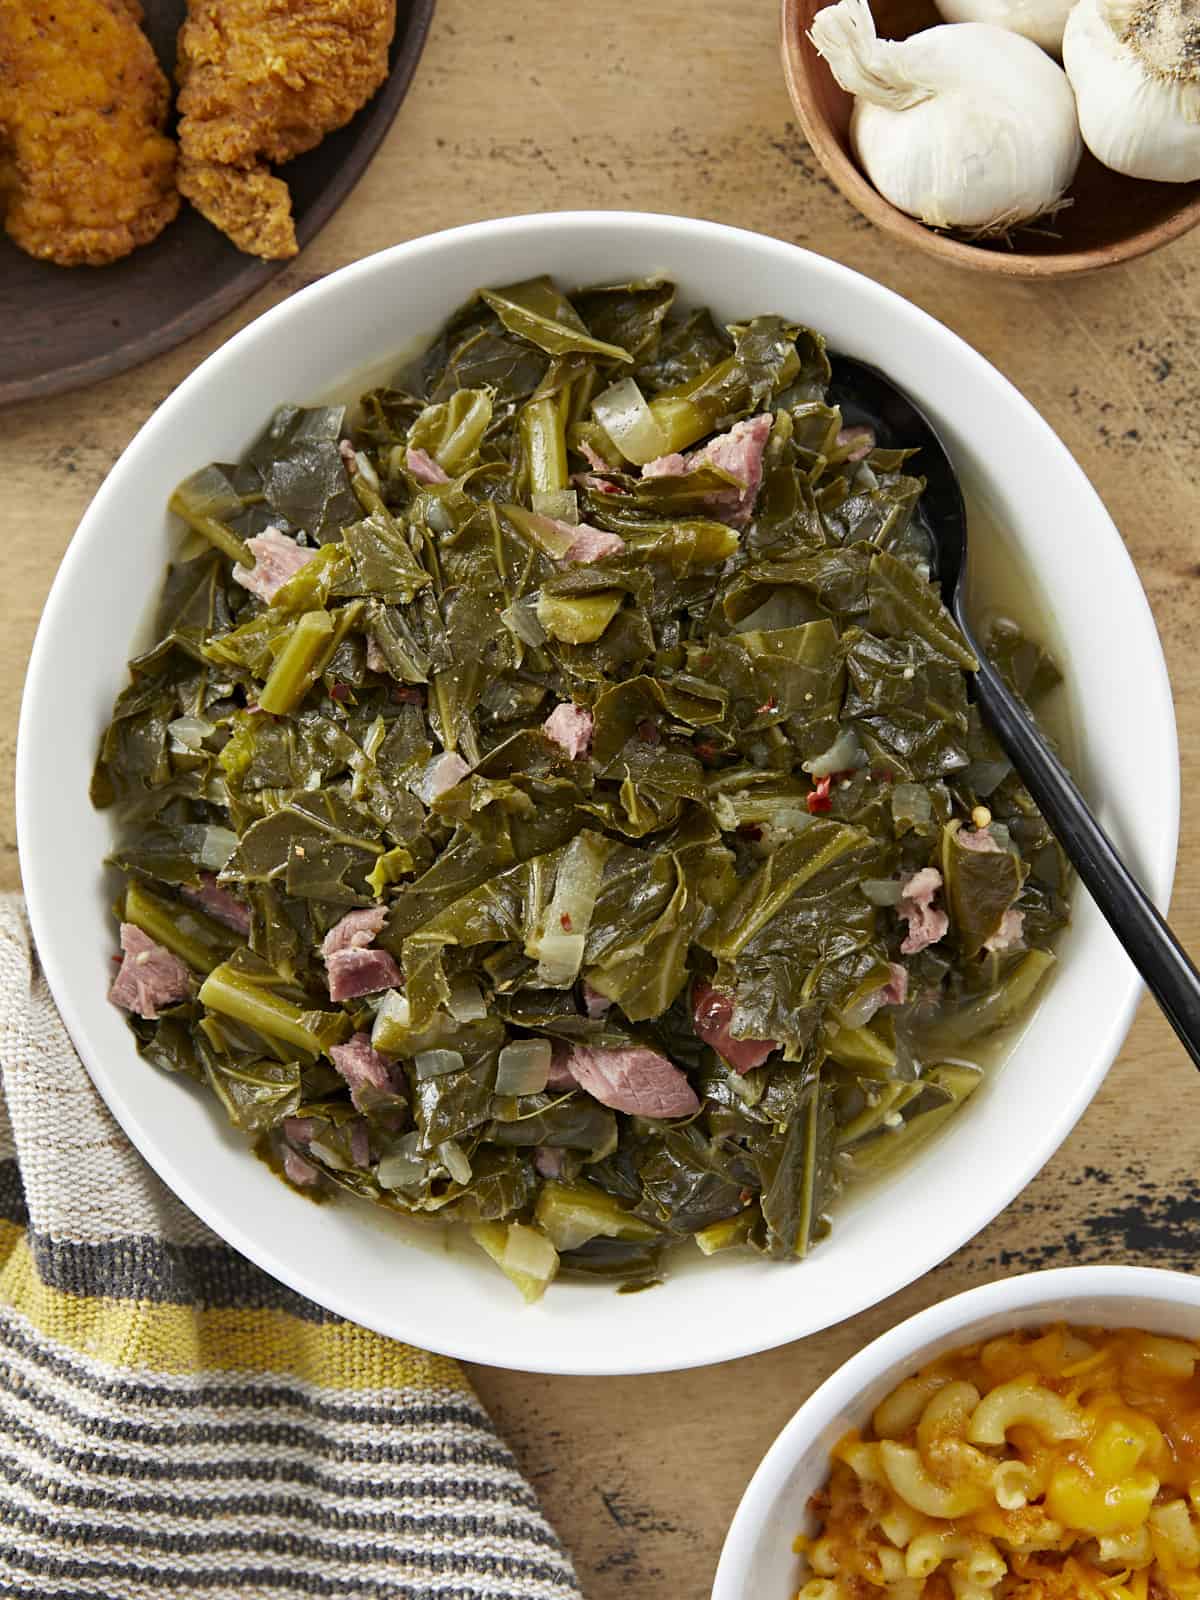 Overhead view of a bowl full of collard greens with ham.